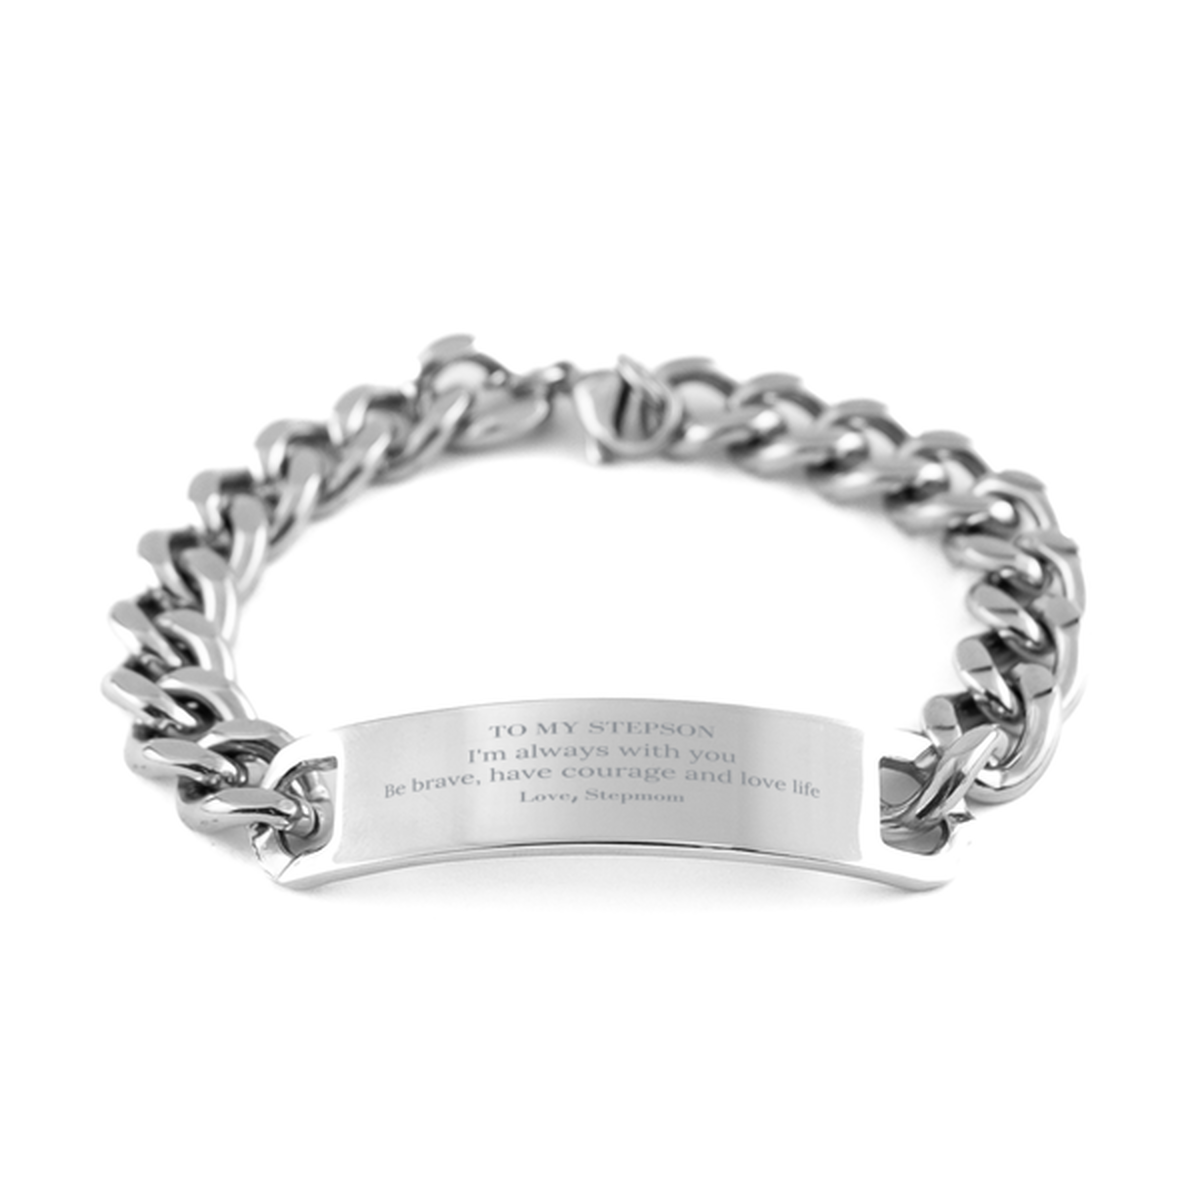 To My Stepson Gifts from Stepmom, Unique Cuban Chain Stainless Steel Bracelet Inspirational Christmas Birthday Graduation Gifts for Stepson I'm always with you. Be brave, have courage and love life. Love, Stepmom